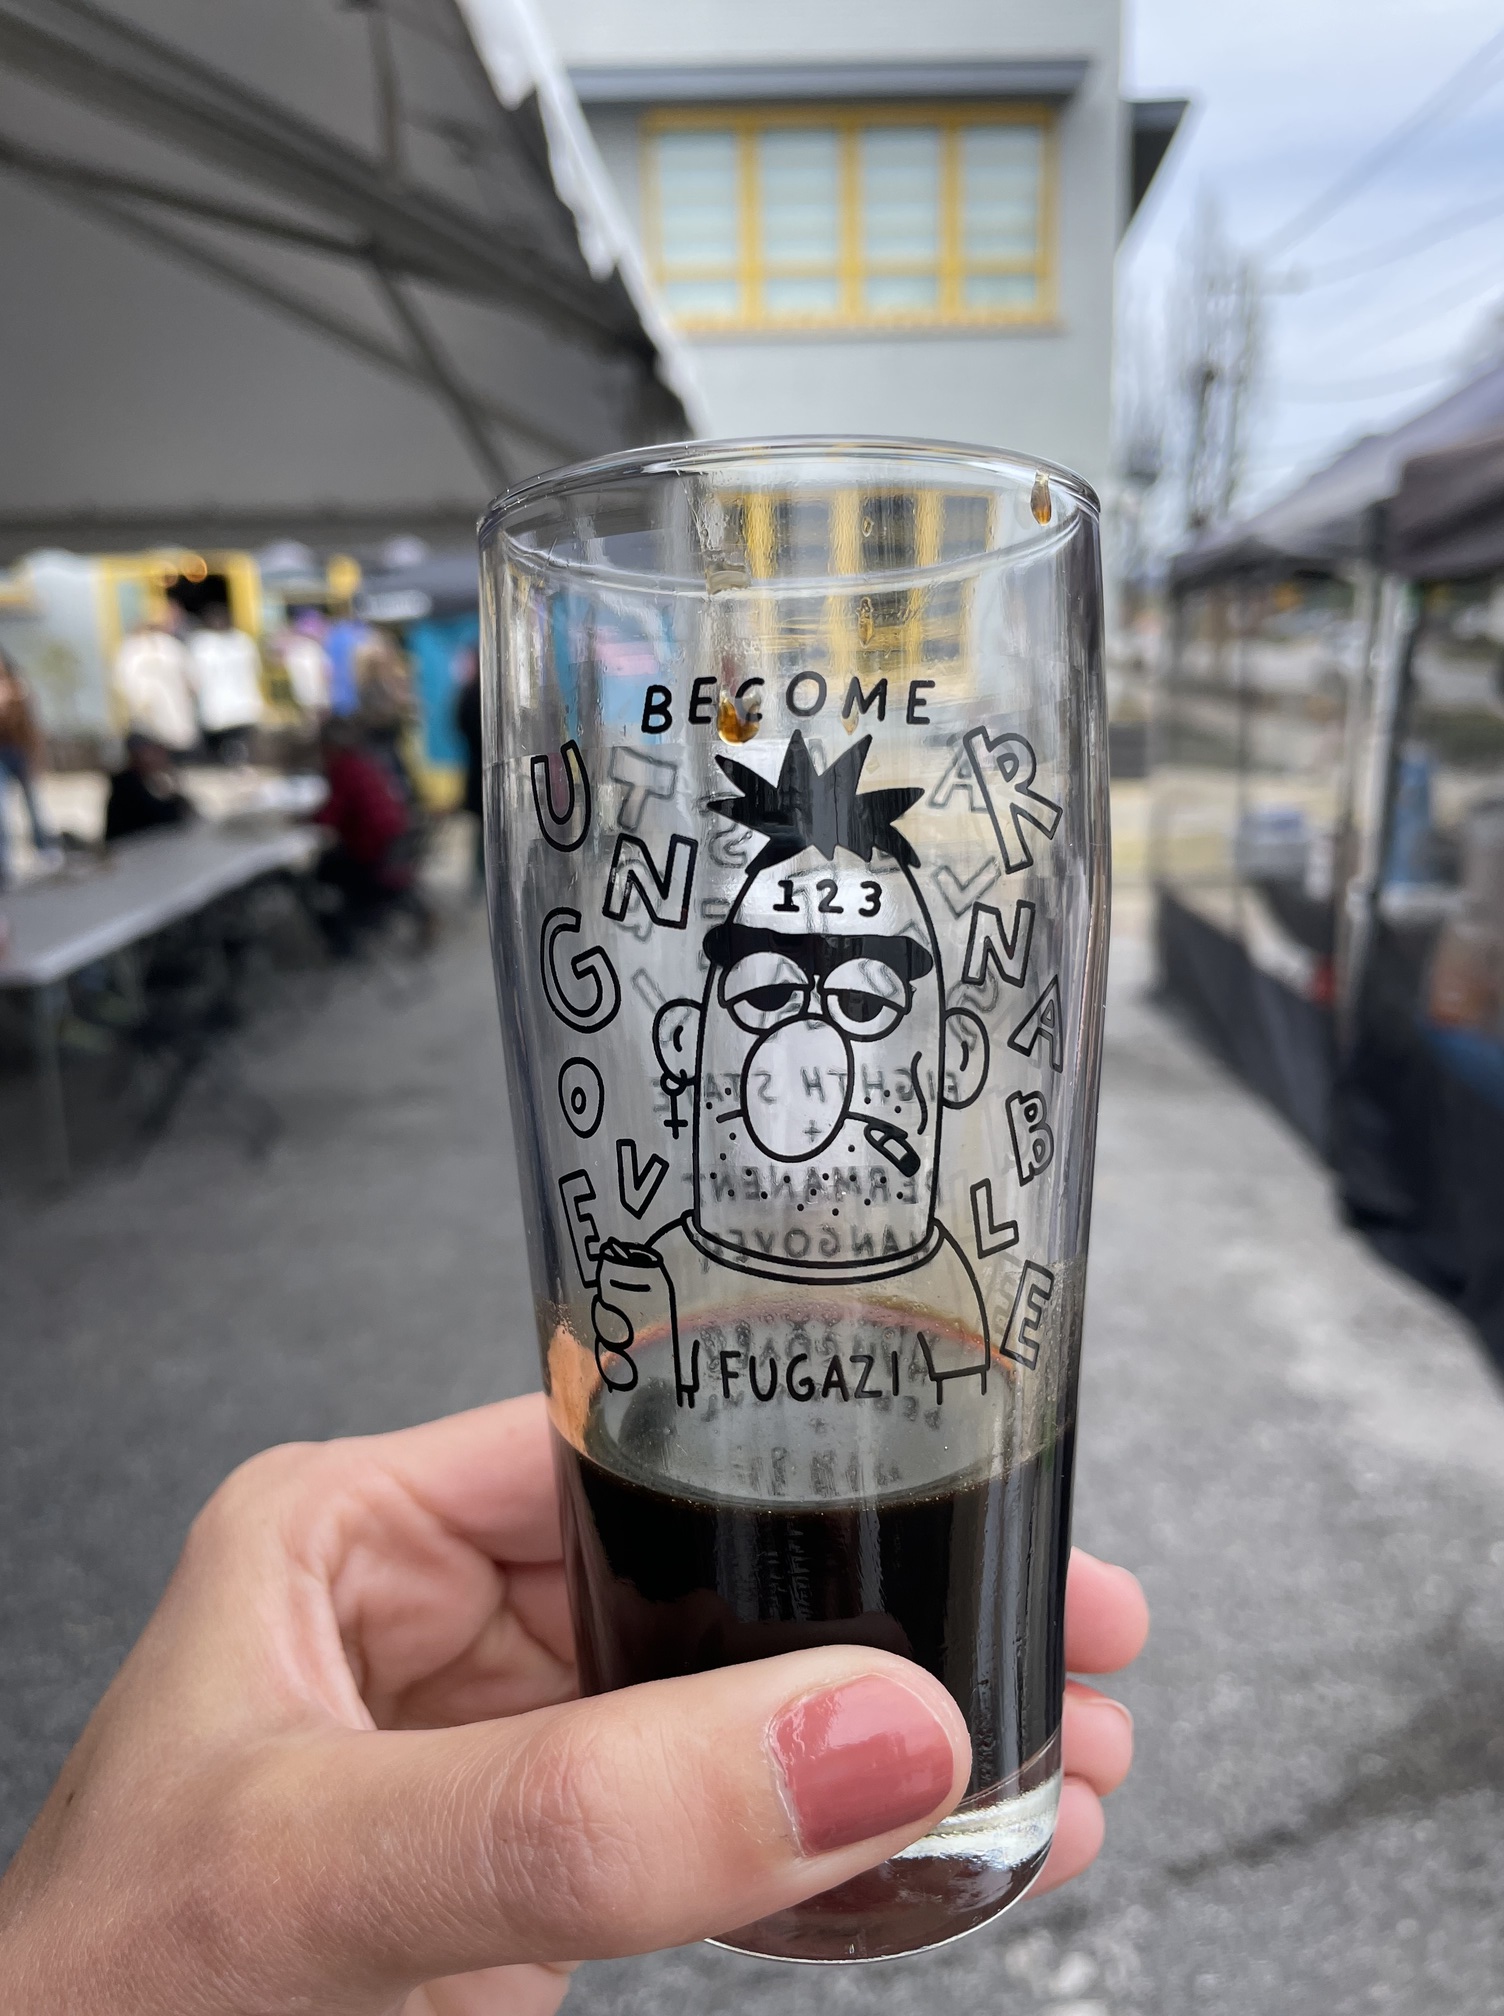 A photo of a commemorative glass from the Altered States Volume II festival. It is approximately one-third full of a dark beer.